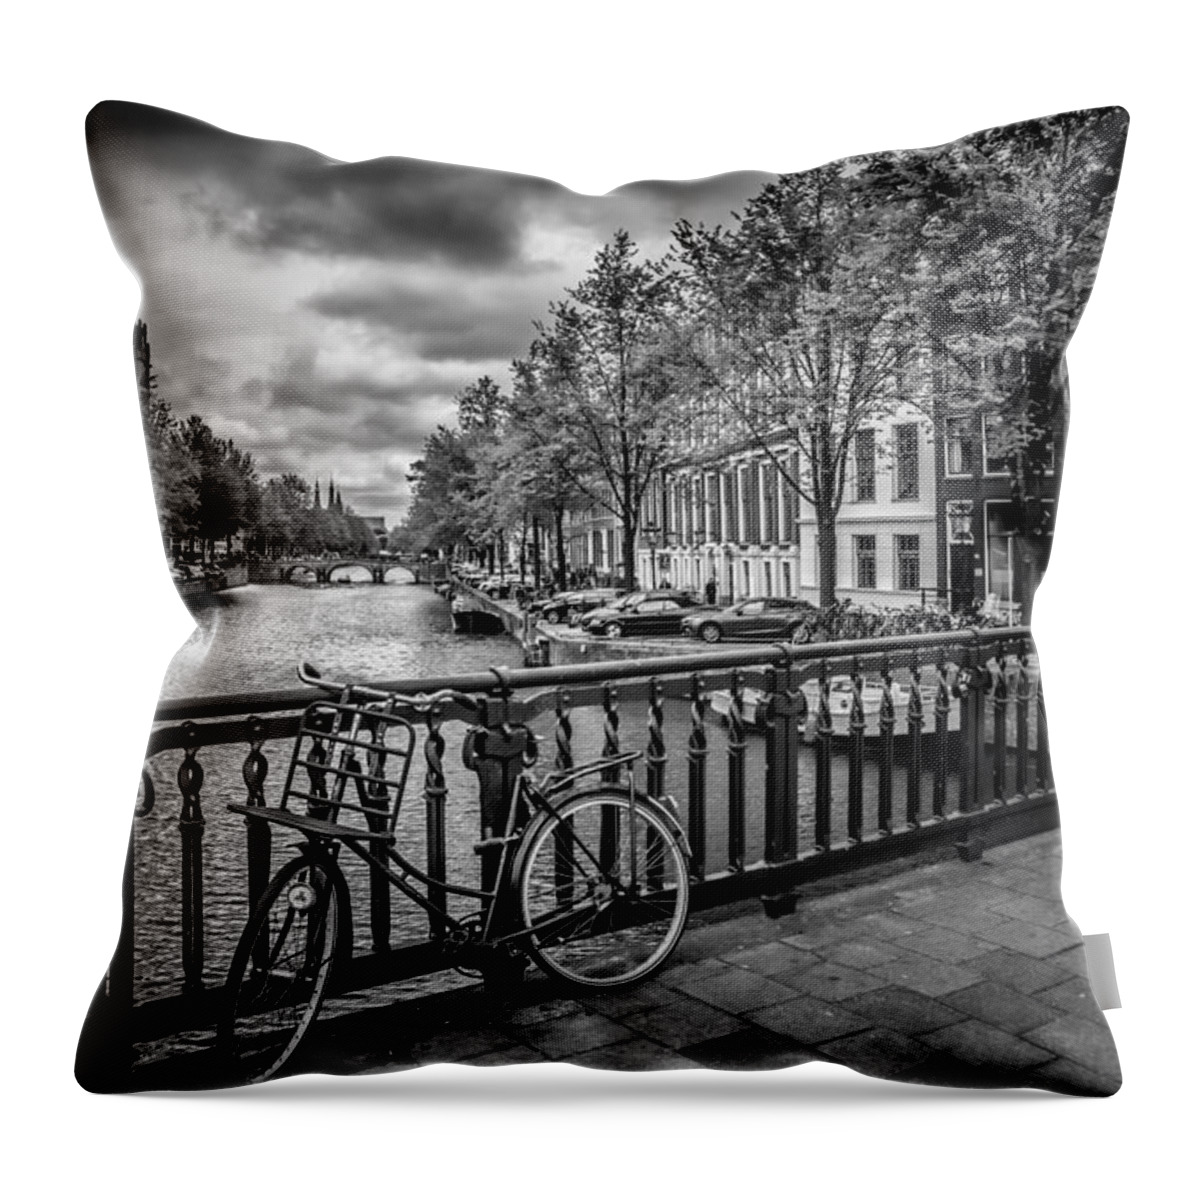 Amsterdam Throw Pillow featuring the photograph Emperor's Canal Amsterdam by Melanie Viola